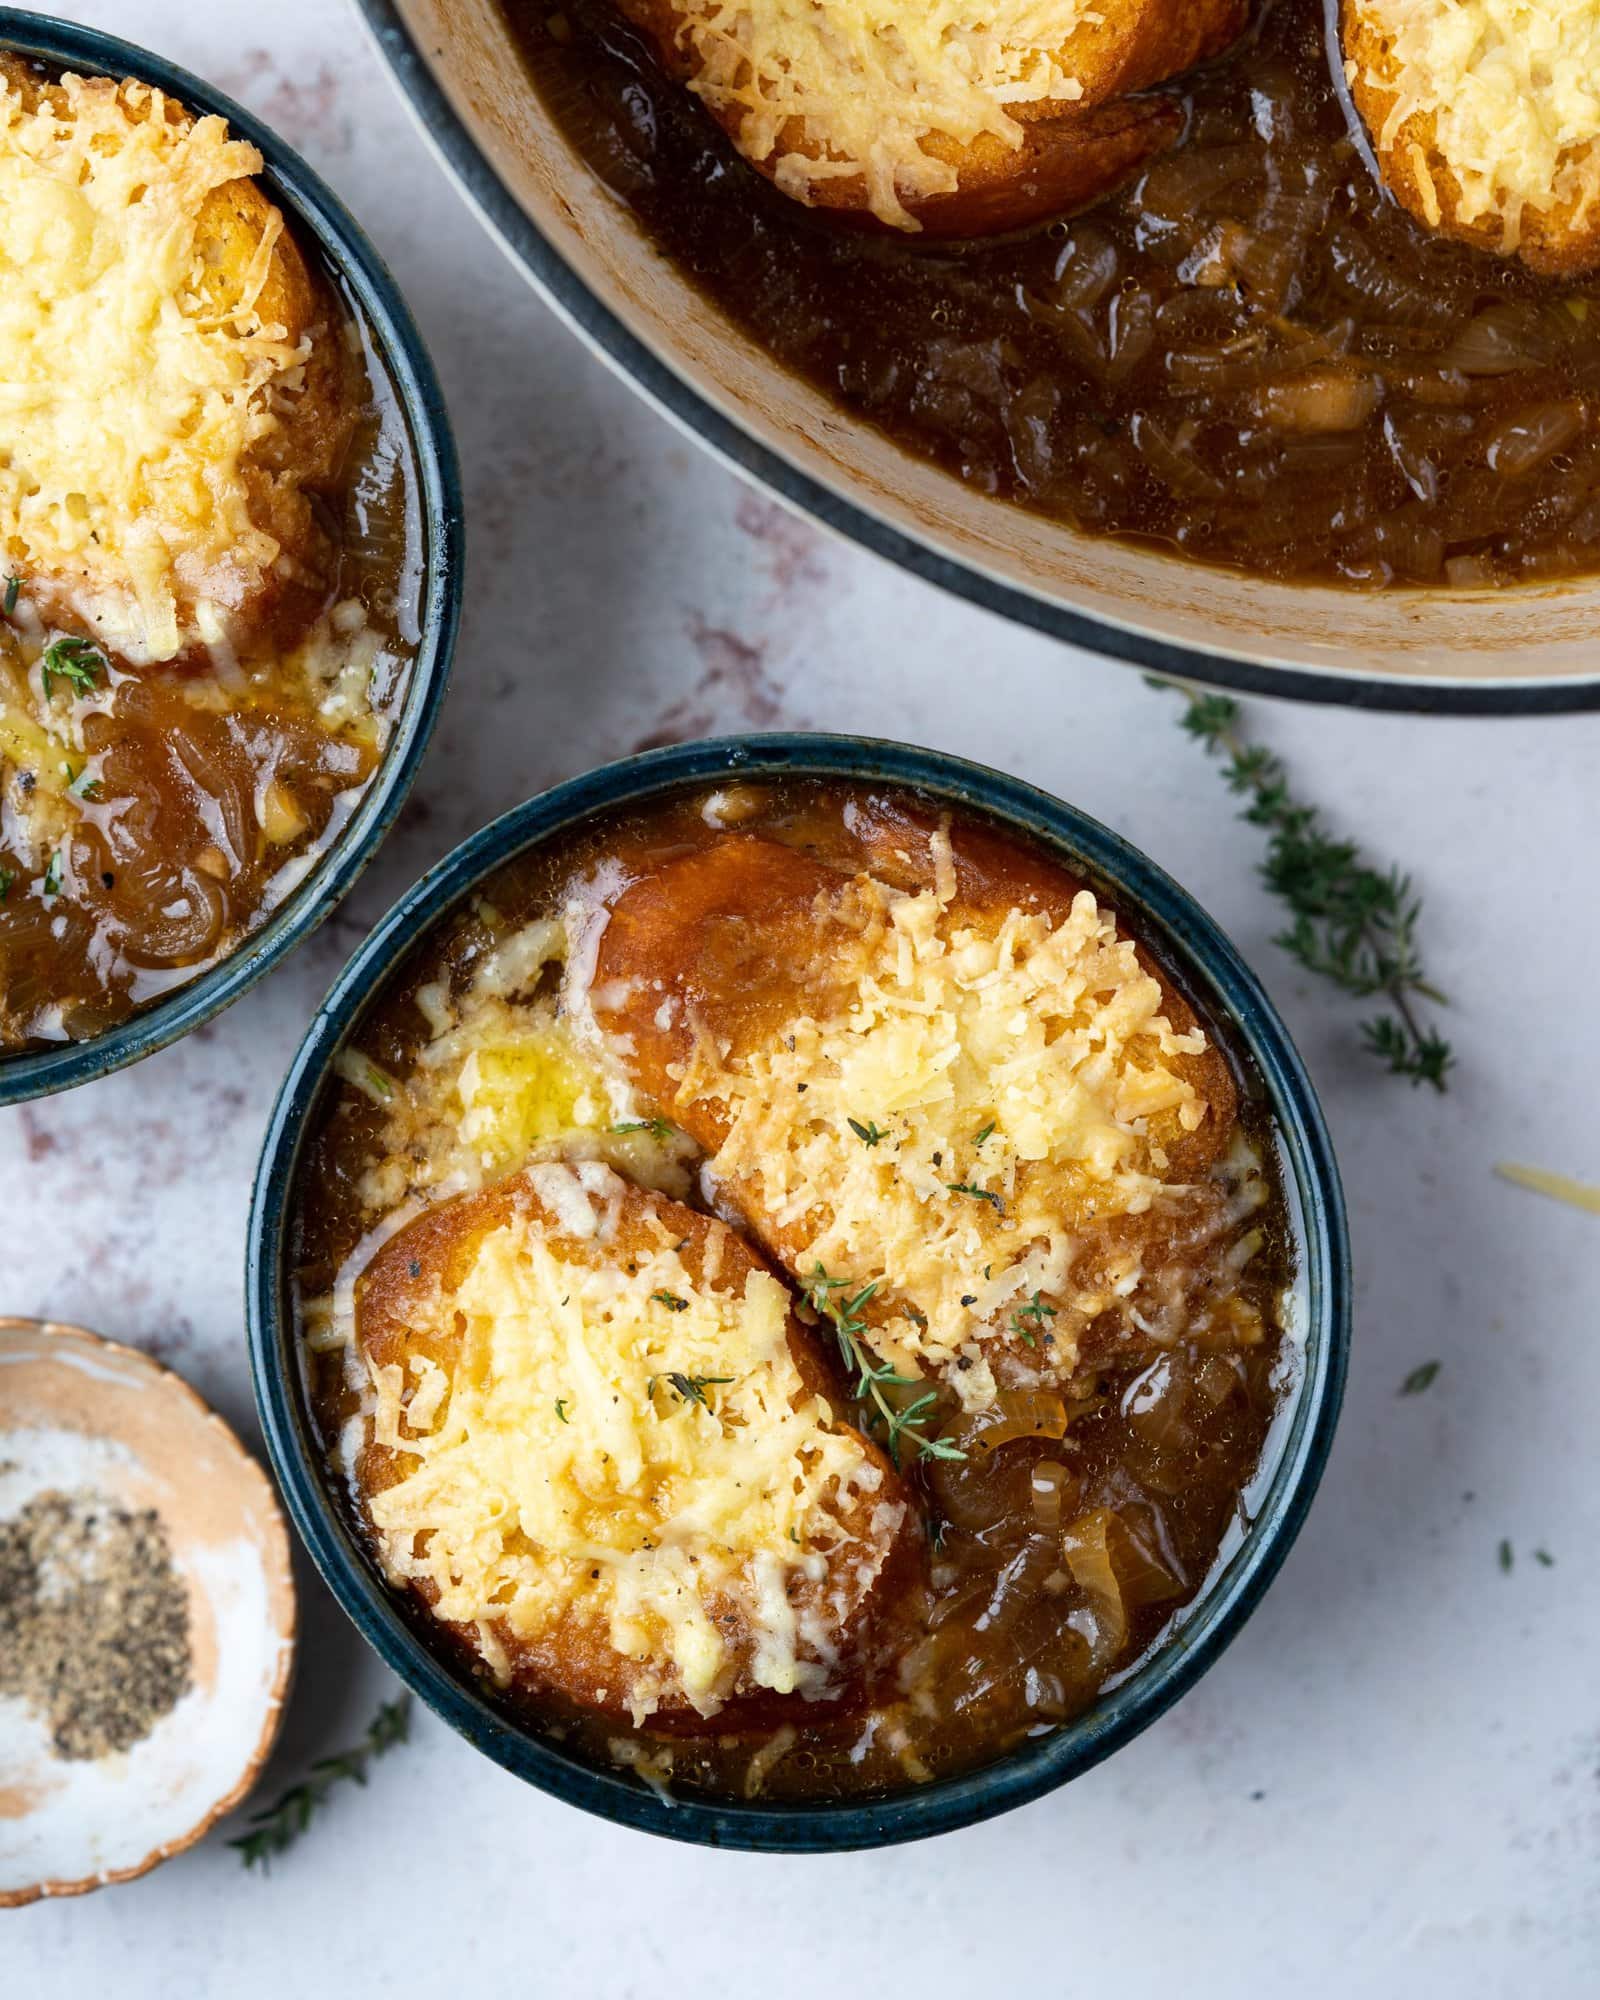 Bowl of french onion soup with cheese topped toasted bread.